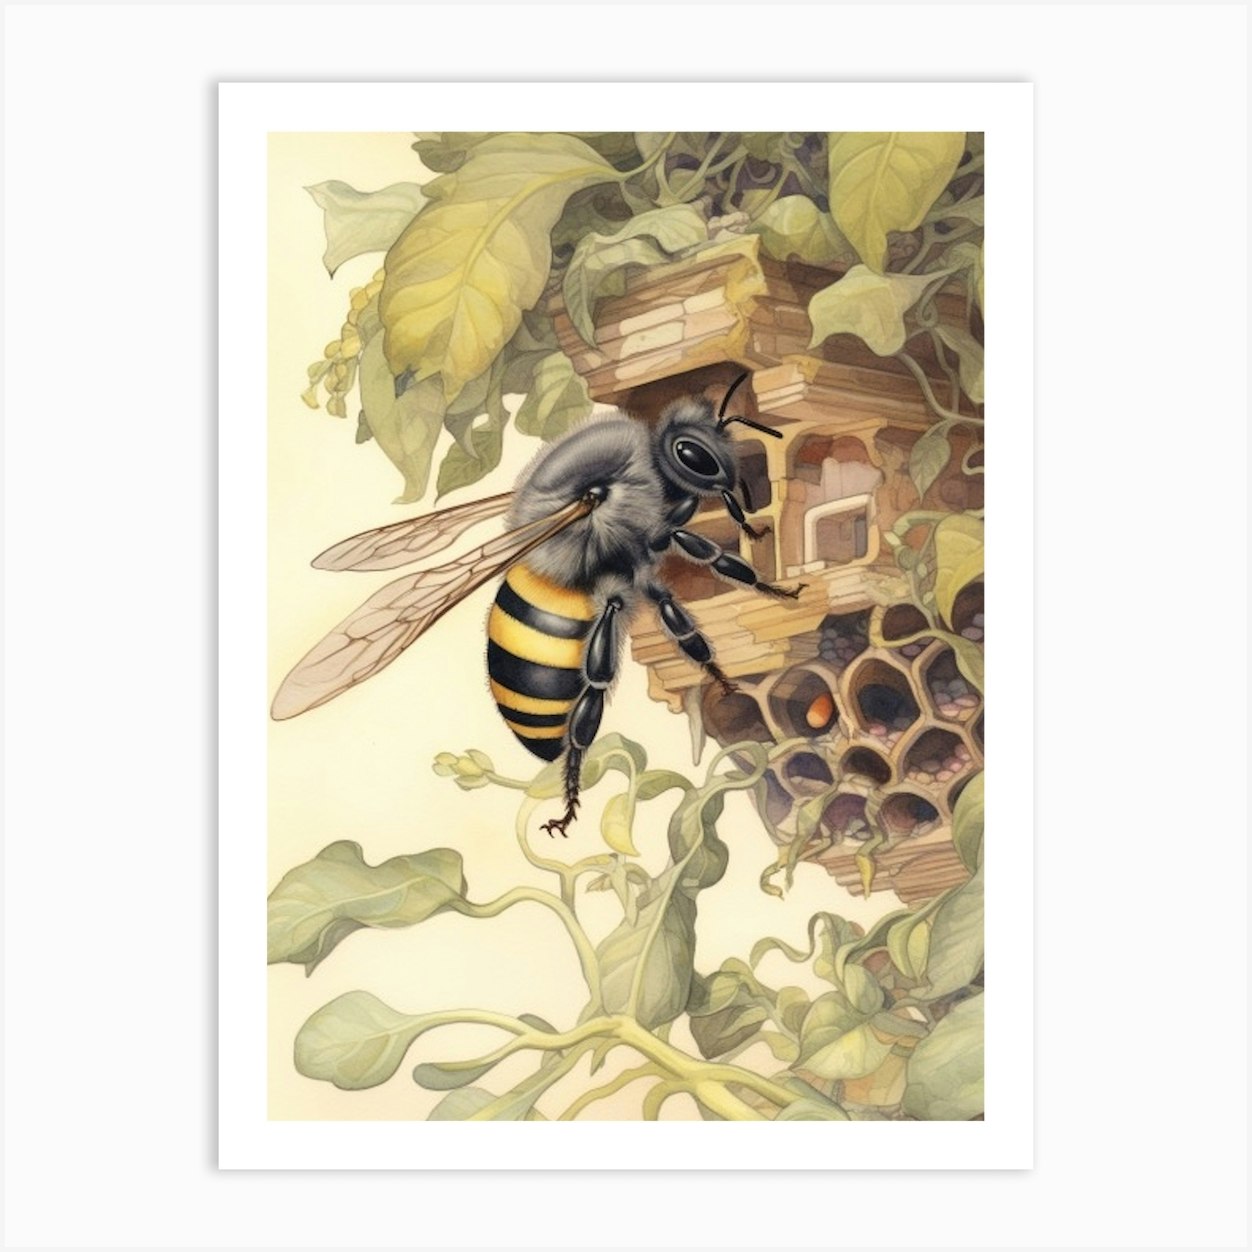 Digger Bee Beehive Watercolour Illustration 4 Art Print by Flora  Expressions - Fy